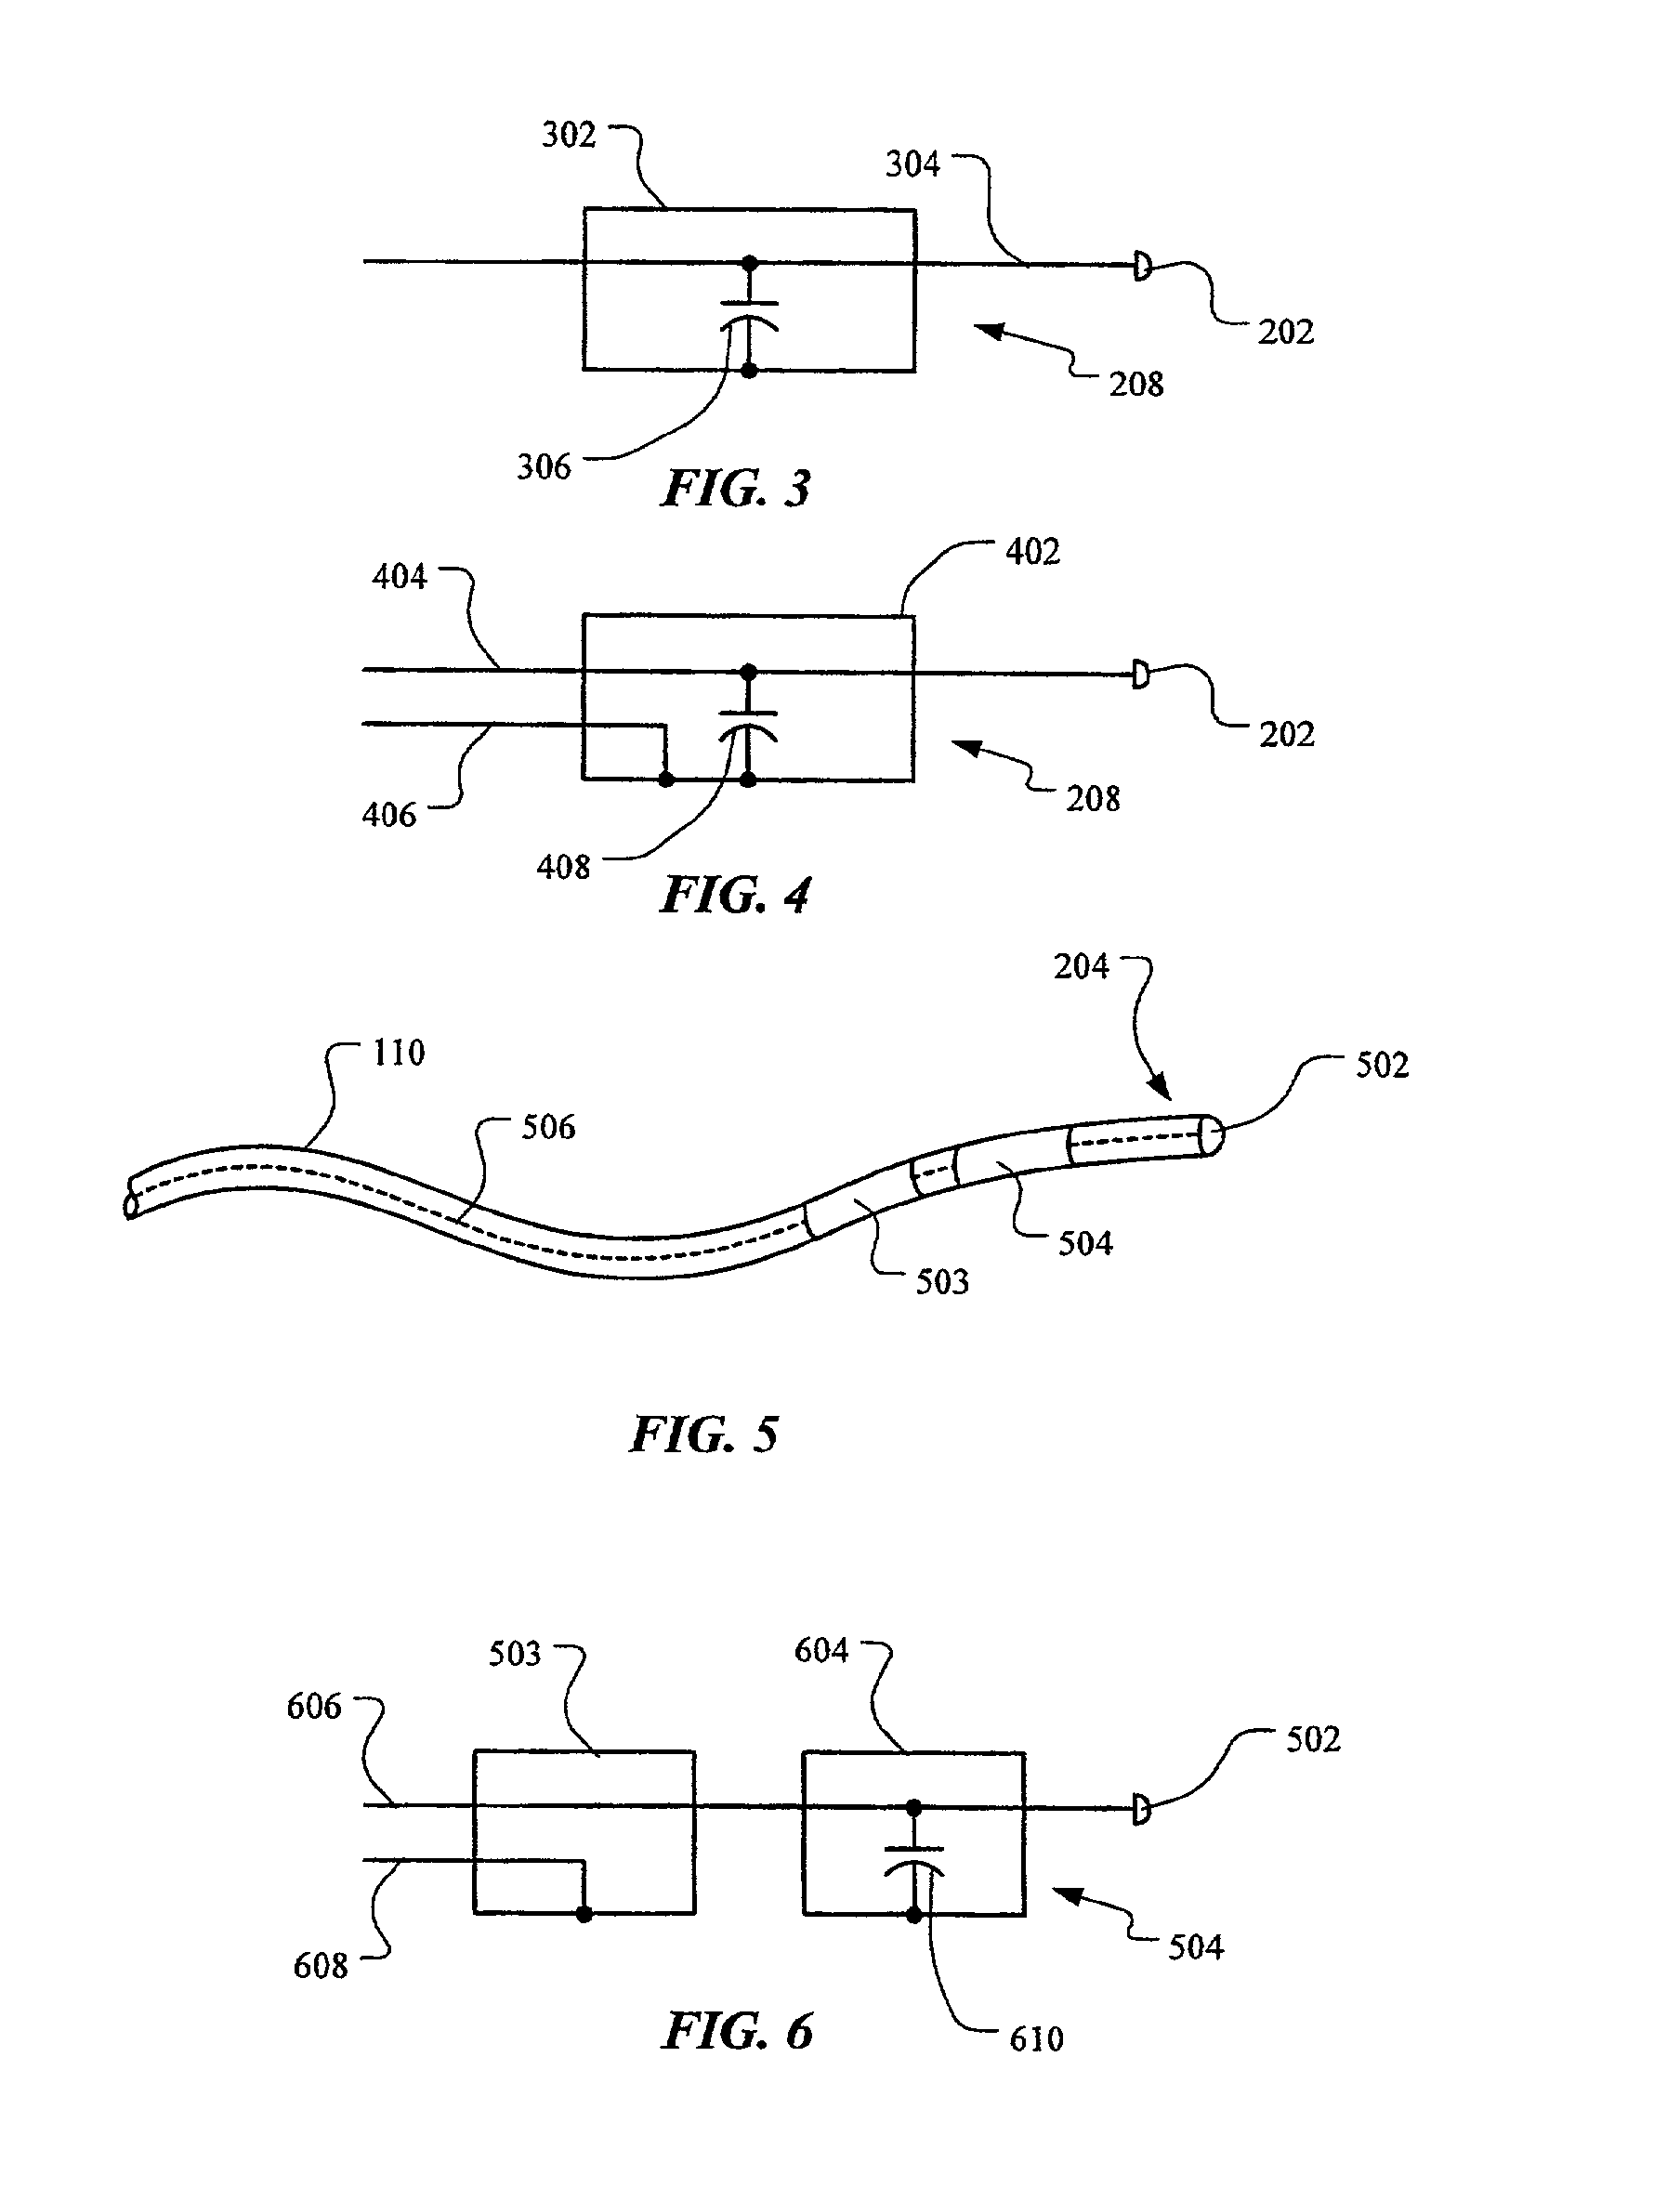 Apparatus and method for shunting induced currents in an electrical lead